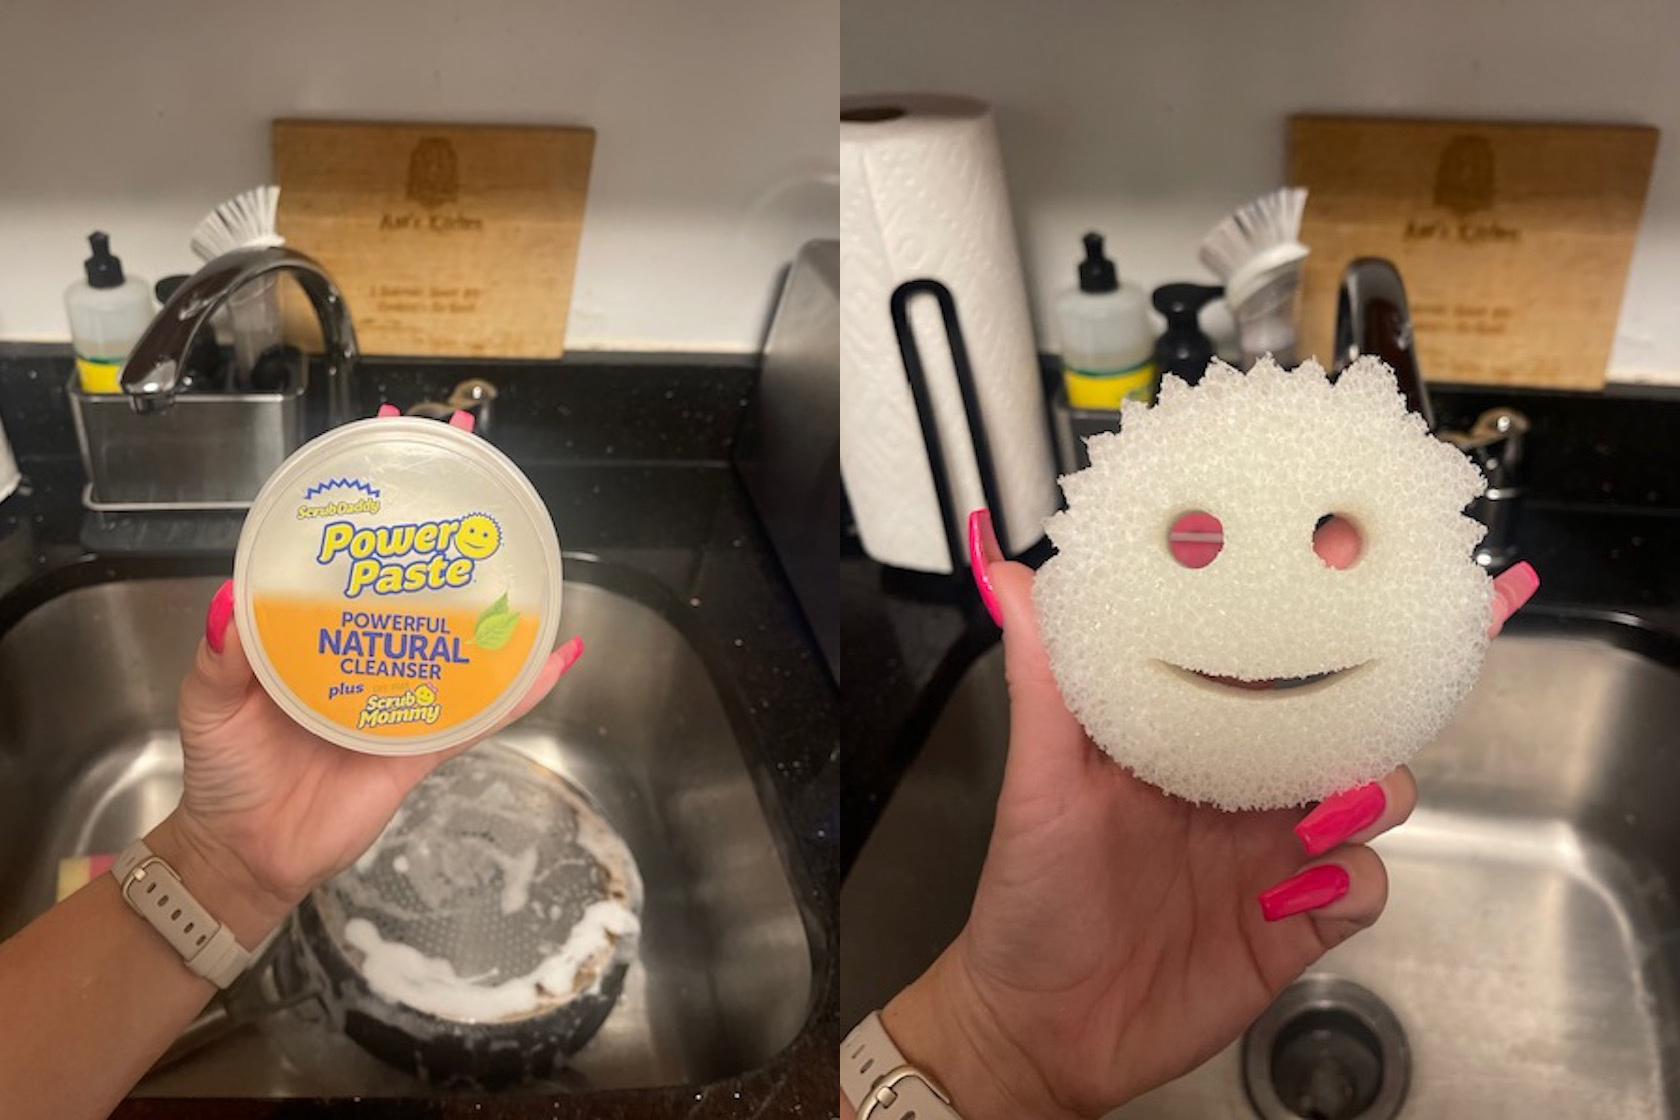 This $10 Scrub Daddy PowerPaste has revived my burnt pots and pans